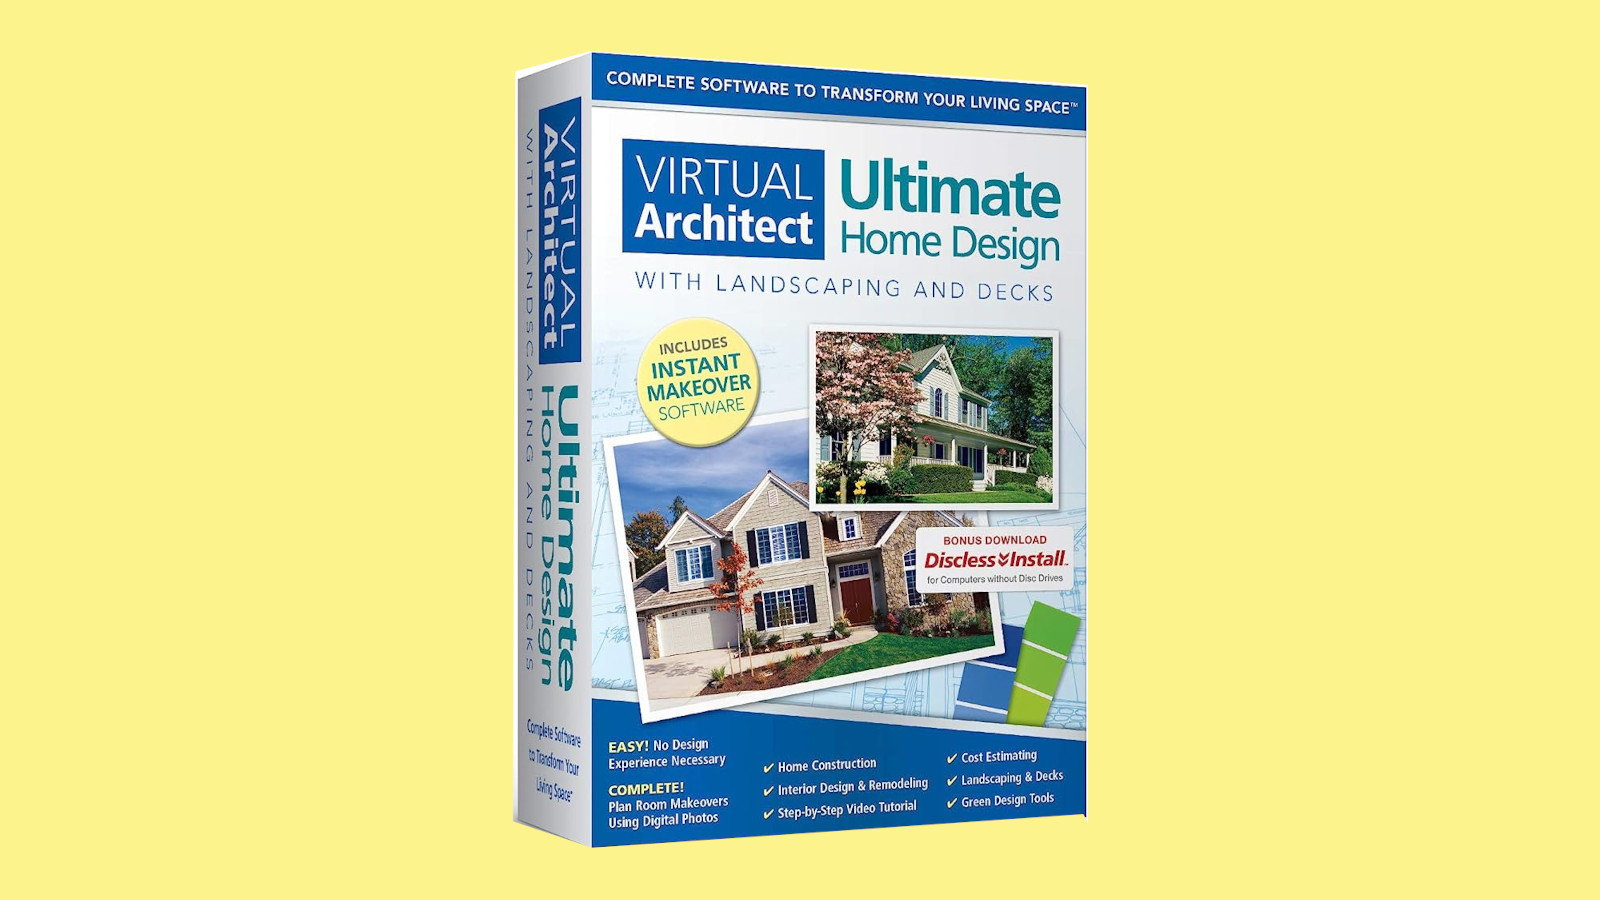 Virtual Architect Ultimate Home Design with Landscaping and Decks CD Key 77.68$